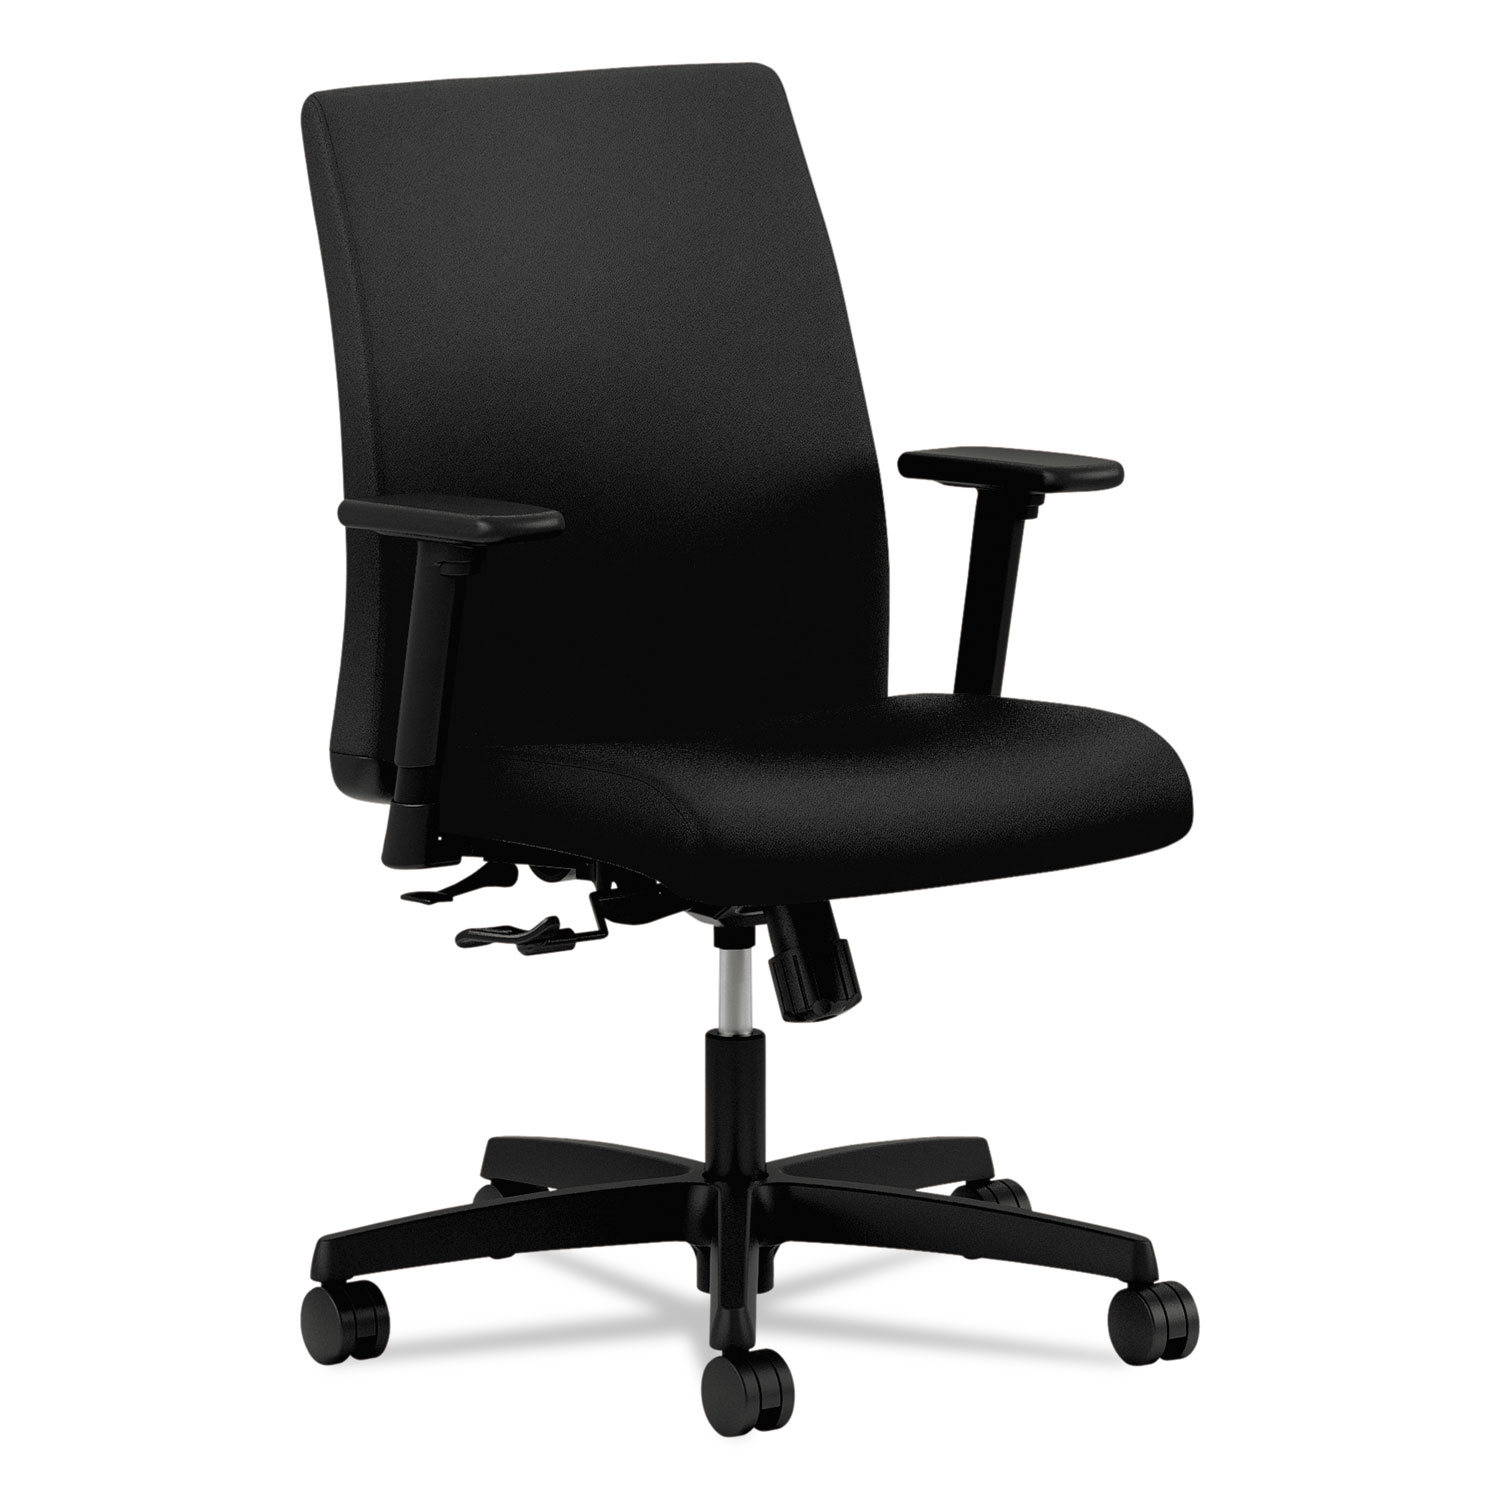  HON HITL1.A.H.U.CU10.T.SB Ignition Series Fabric Low-Back Task Chair, Supports up to 300 lbs., Black Seat/Black Back, Black Base (HONIT105CU10) 